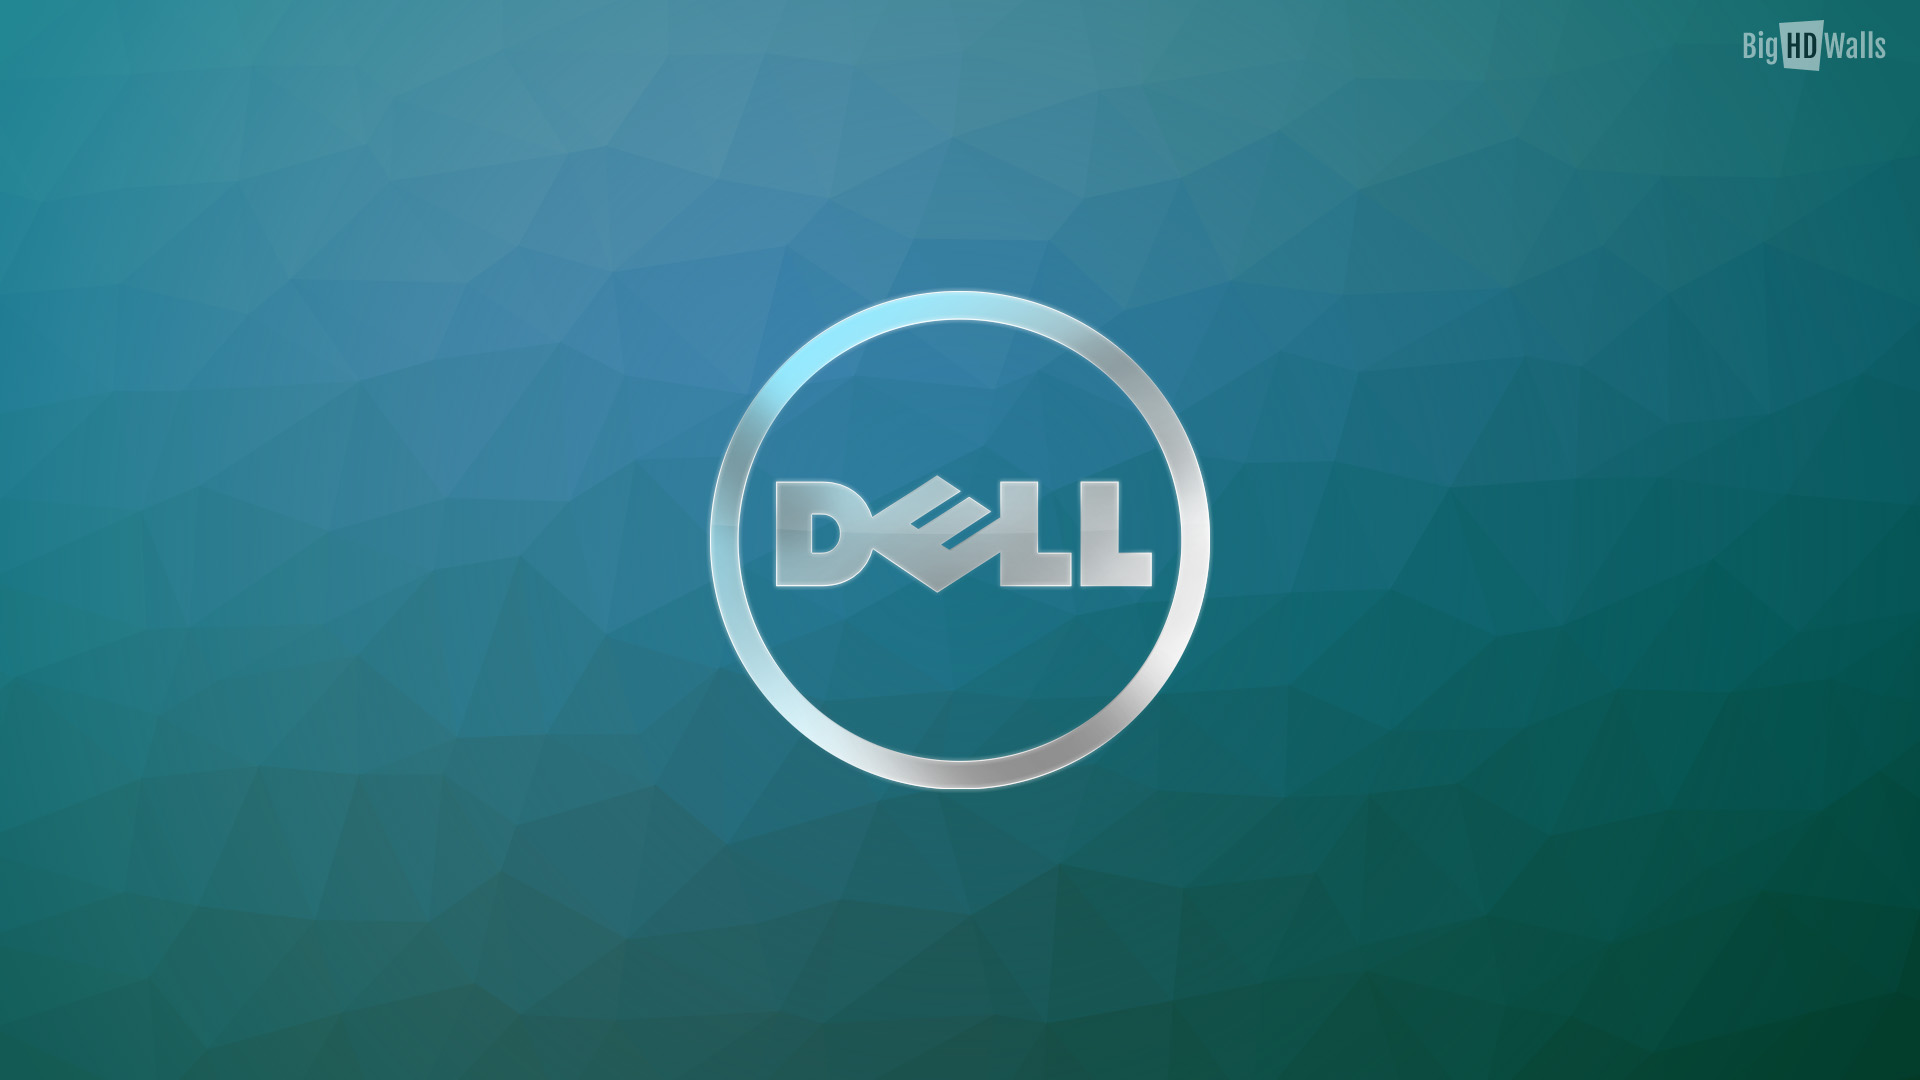 Logo Colors Background Wallpaper Technology Image Dell